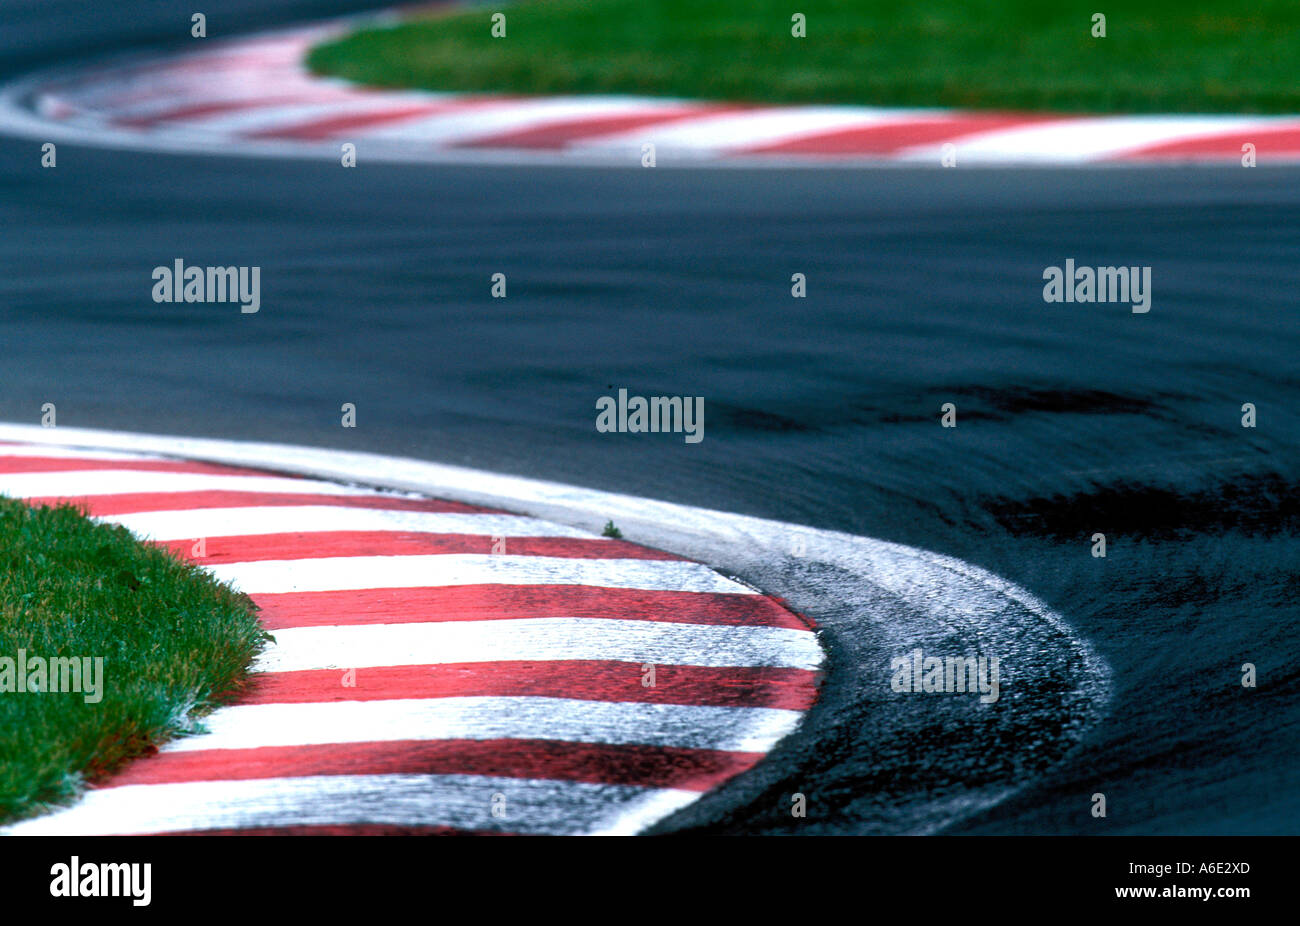 Red and white kerb on a race track Stock Photo